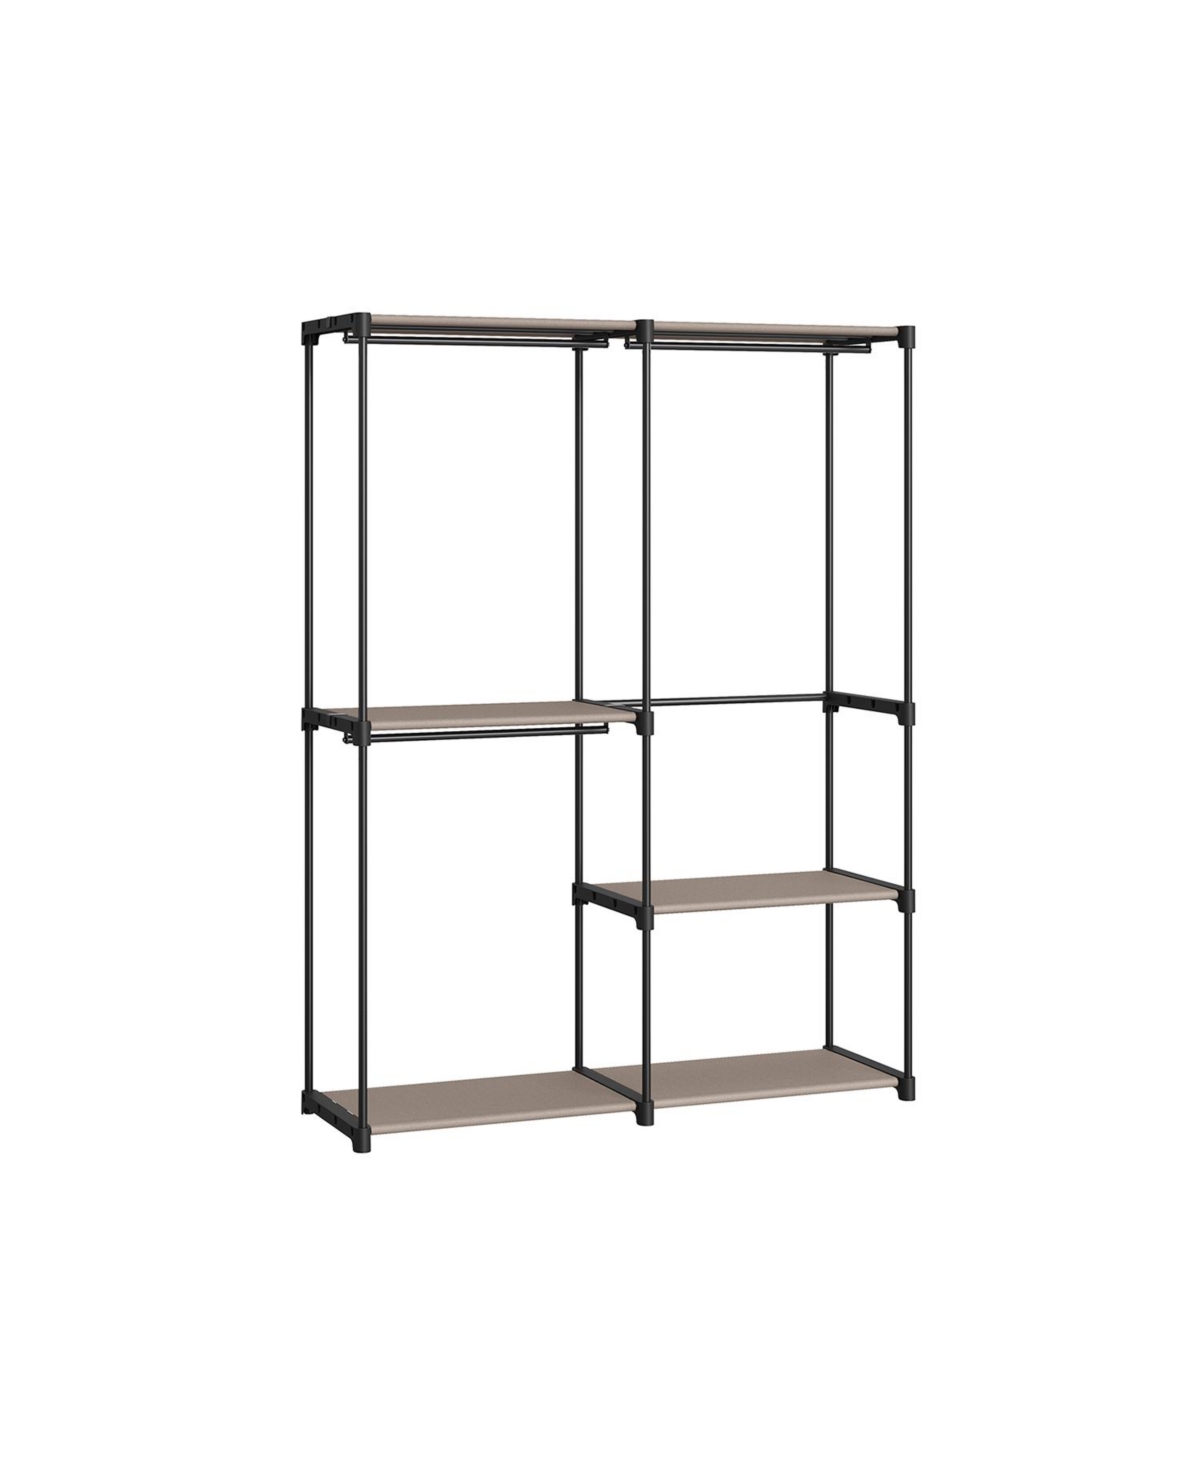 Portable Clothes Rack Freestanding For Bedroom - Brown